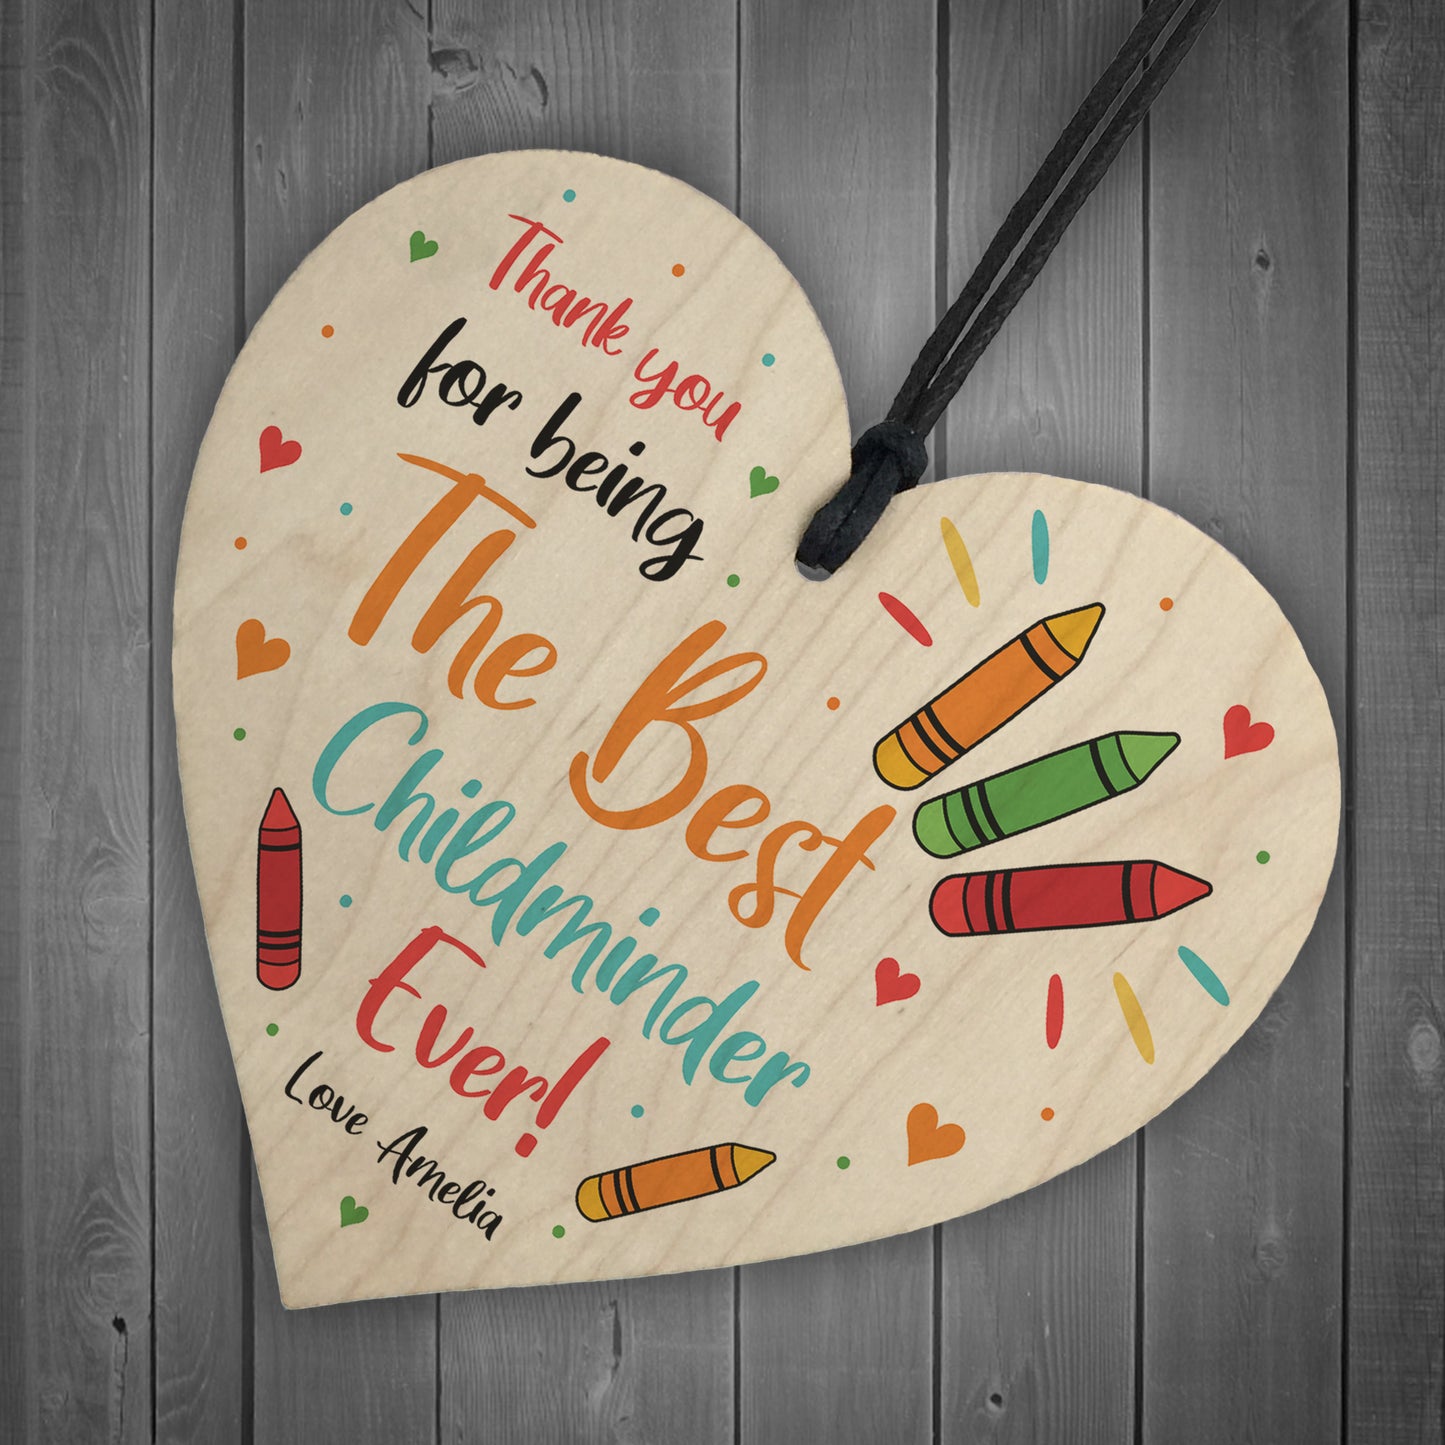 Colourful Gift For Childminder Wood Heart Personalised Thank You